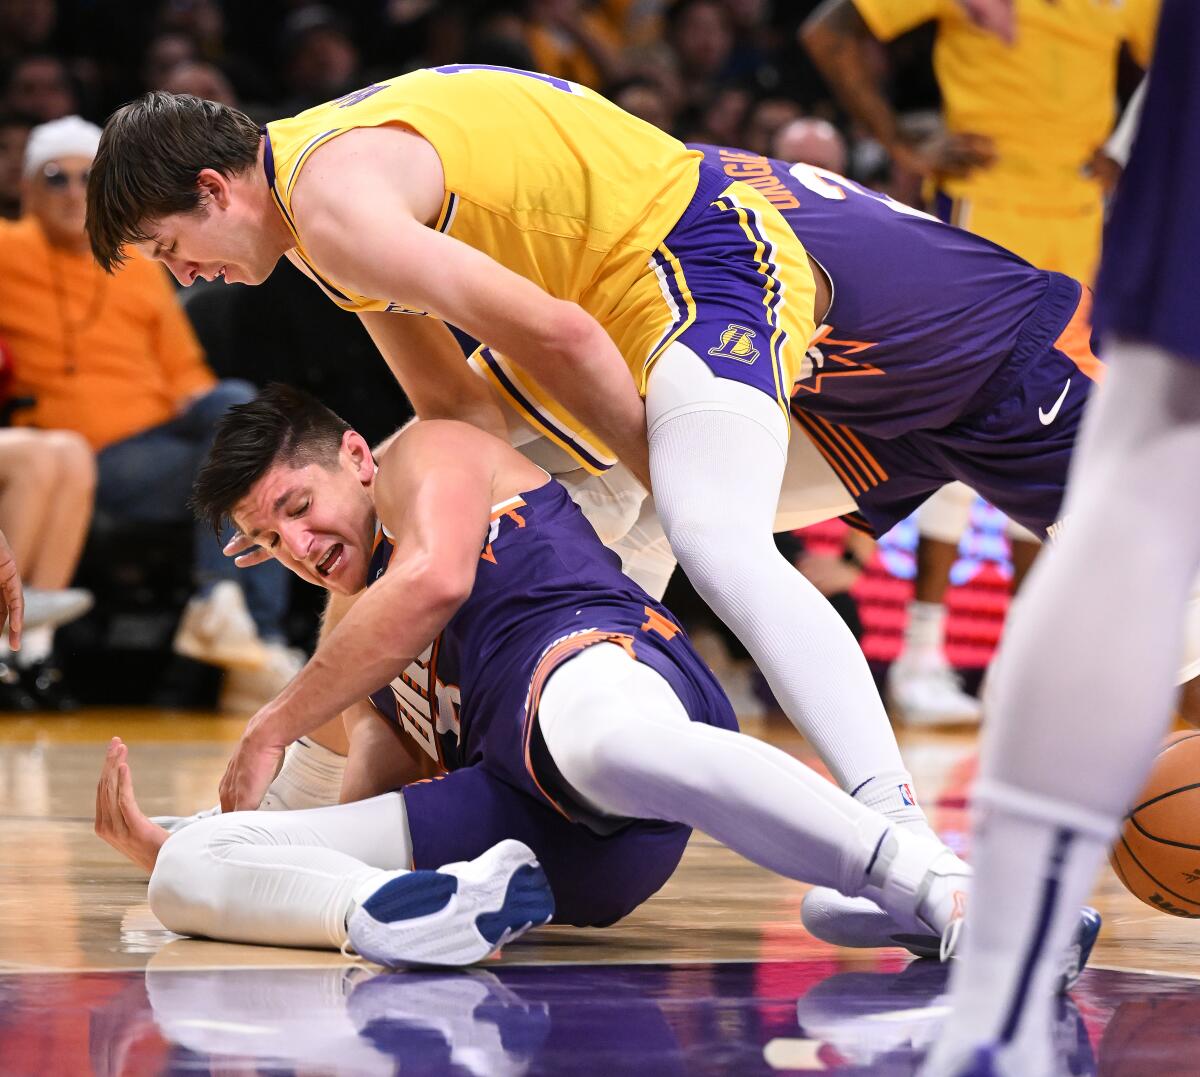 Lakers guard Austin Reaves and Suns guard Grayson Allen battle for a loose ball.